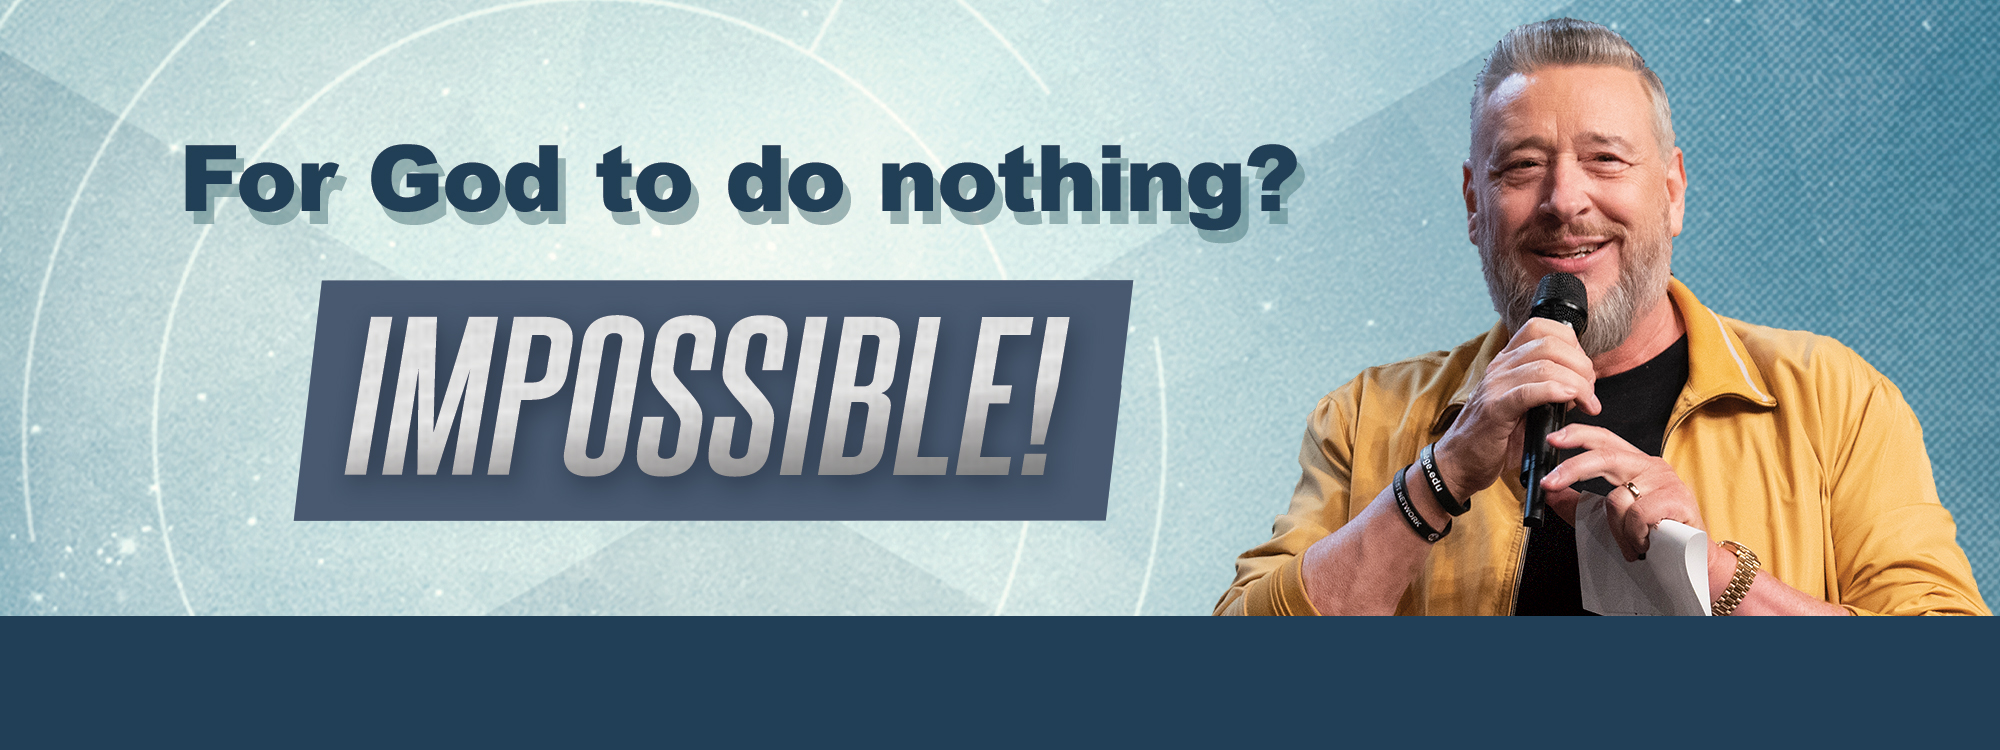 For God to do nothing? IMPOSSIBLE!